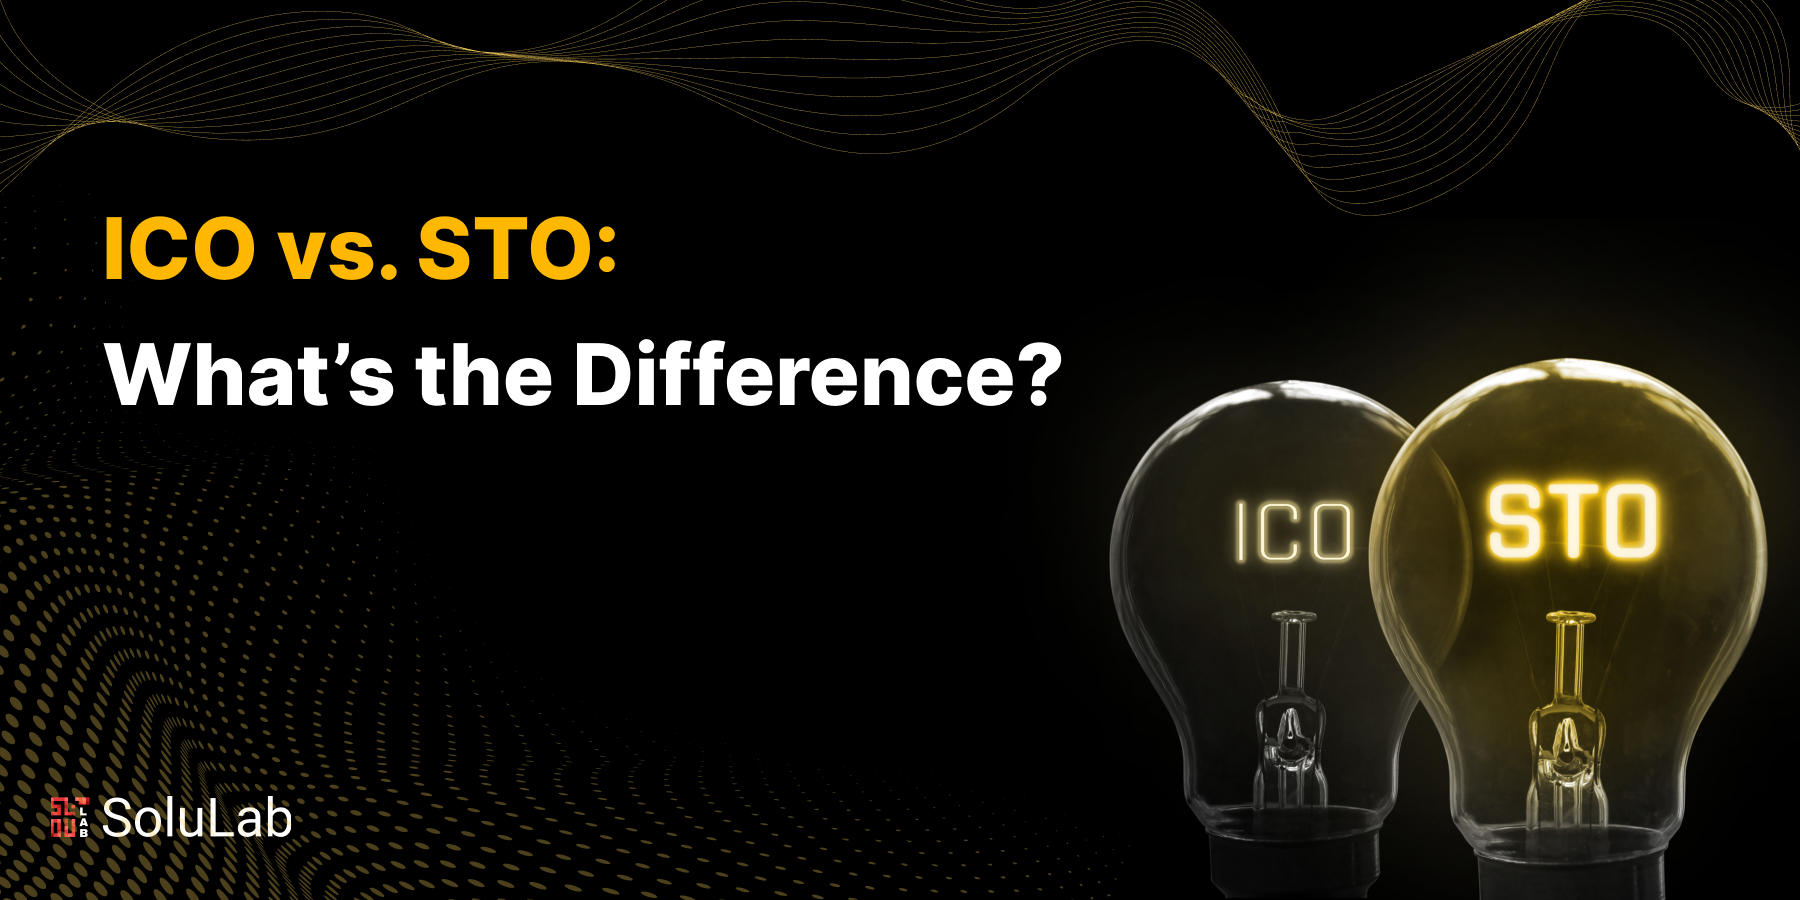 ICO vs. STO: What’s the Difference?